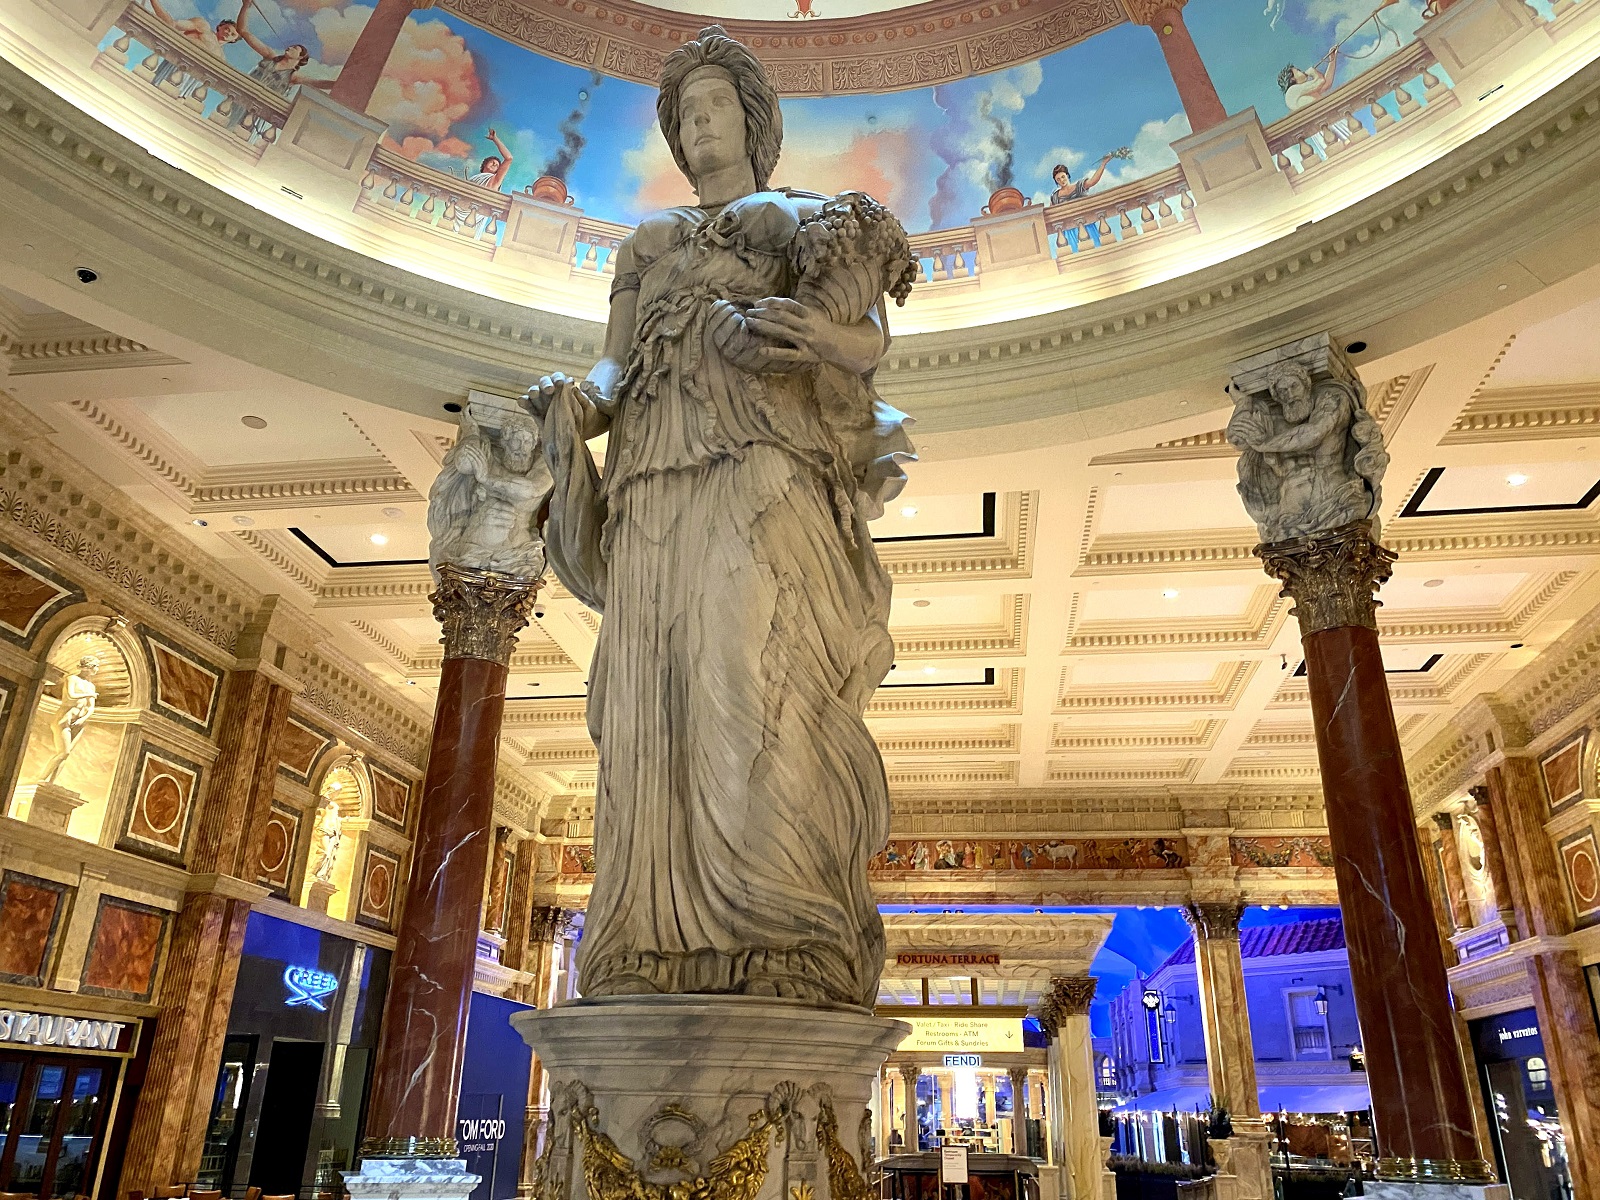 Caesars Rewards Salute Card Offers Discounts and Perks to Military & Veterans